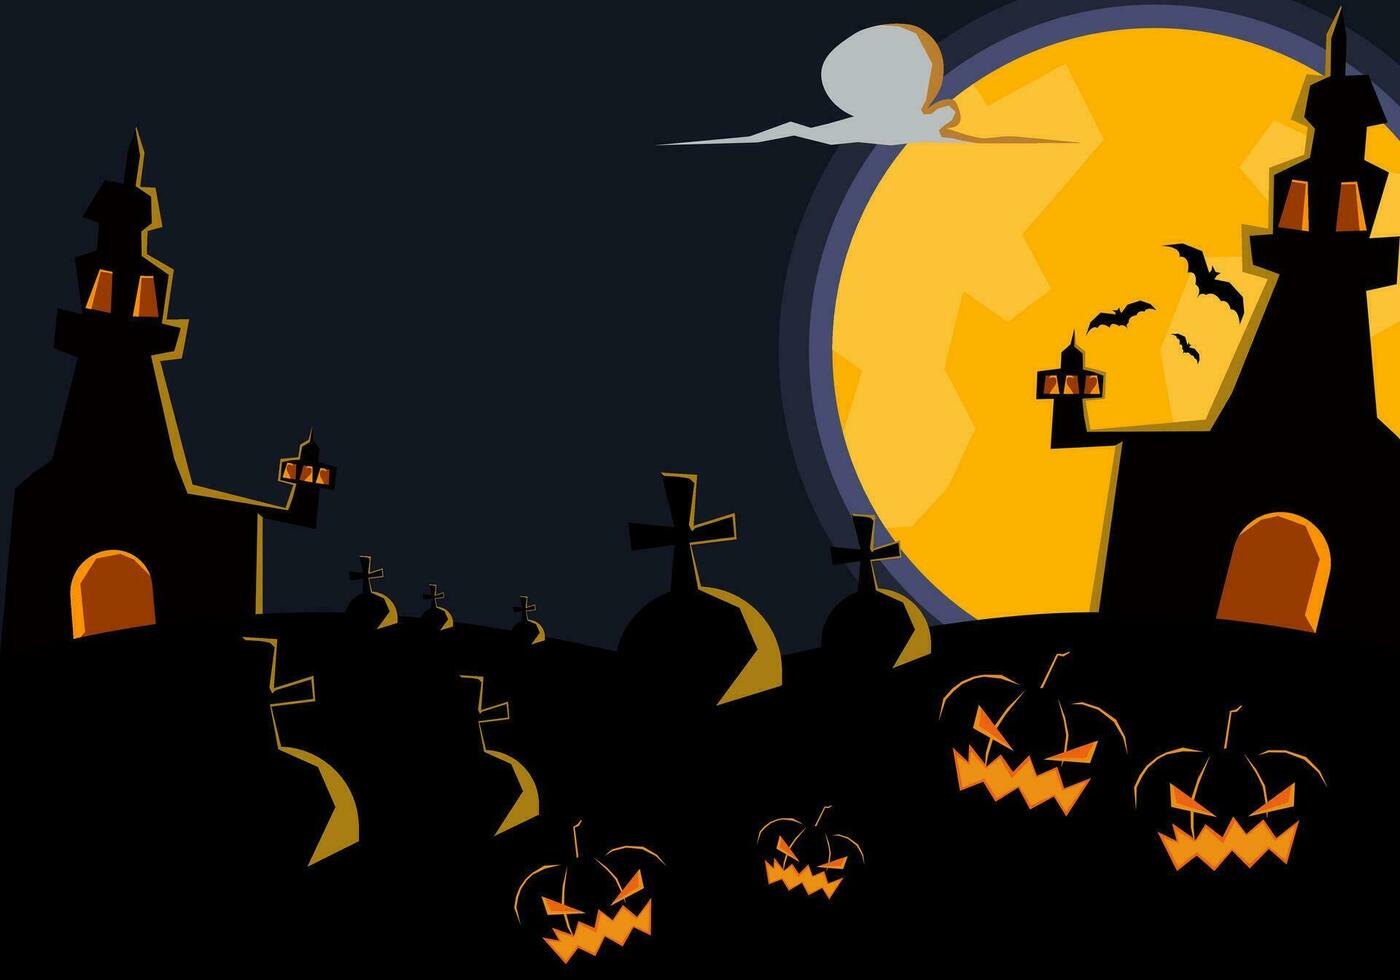 Halloween background. Haunted castle among cemeteries on a full moon night. There is a copy space for Insert letters. vector illustration.